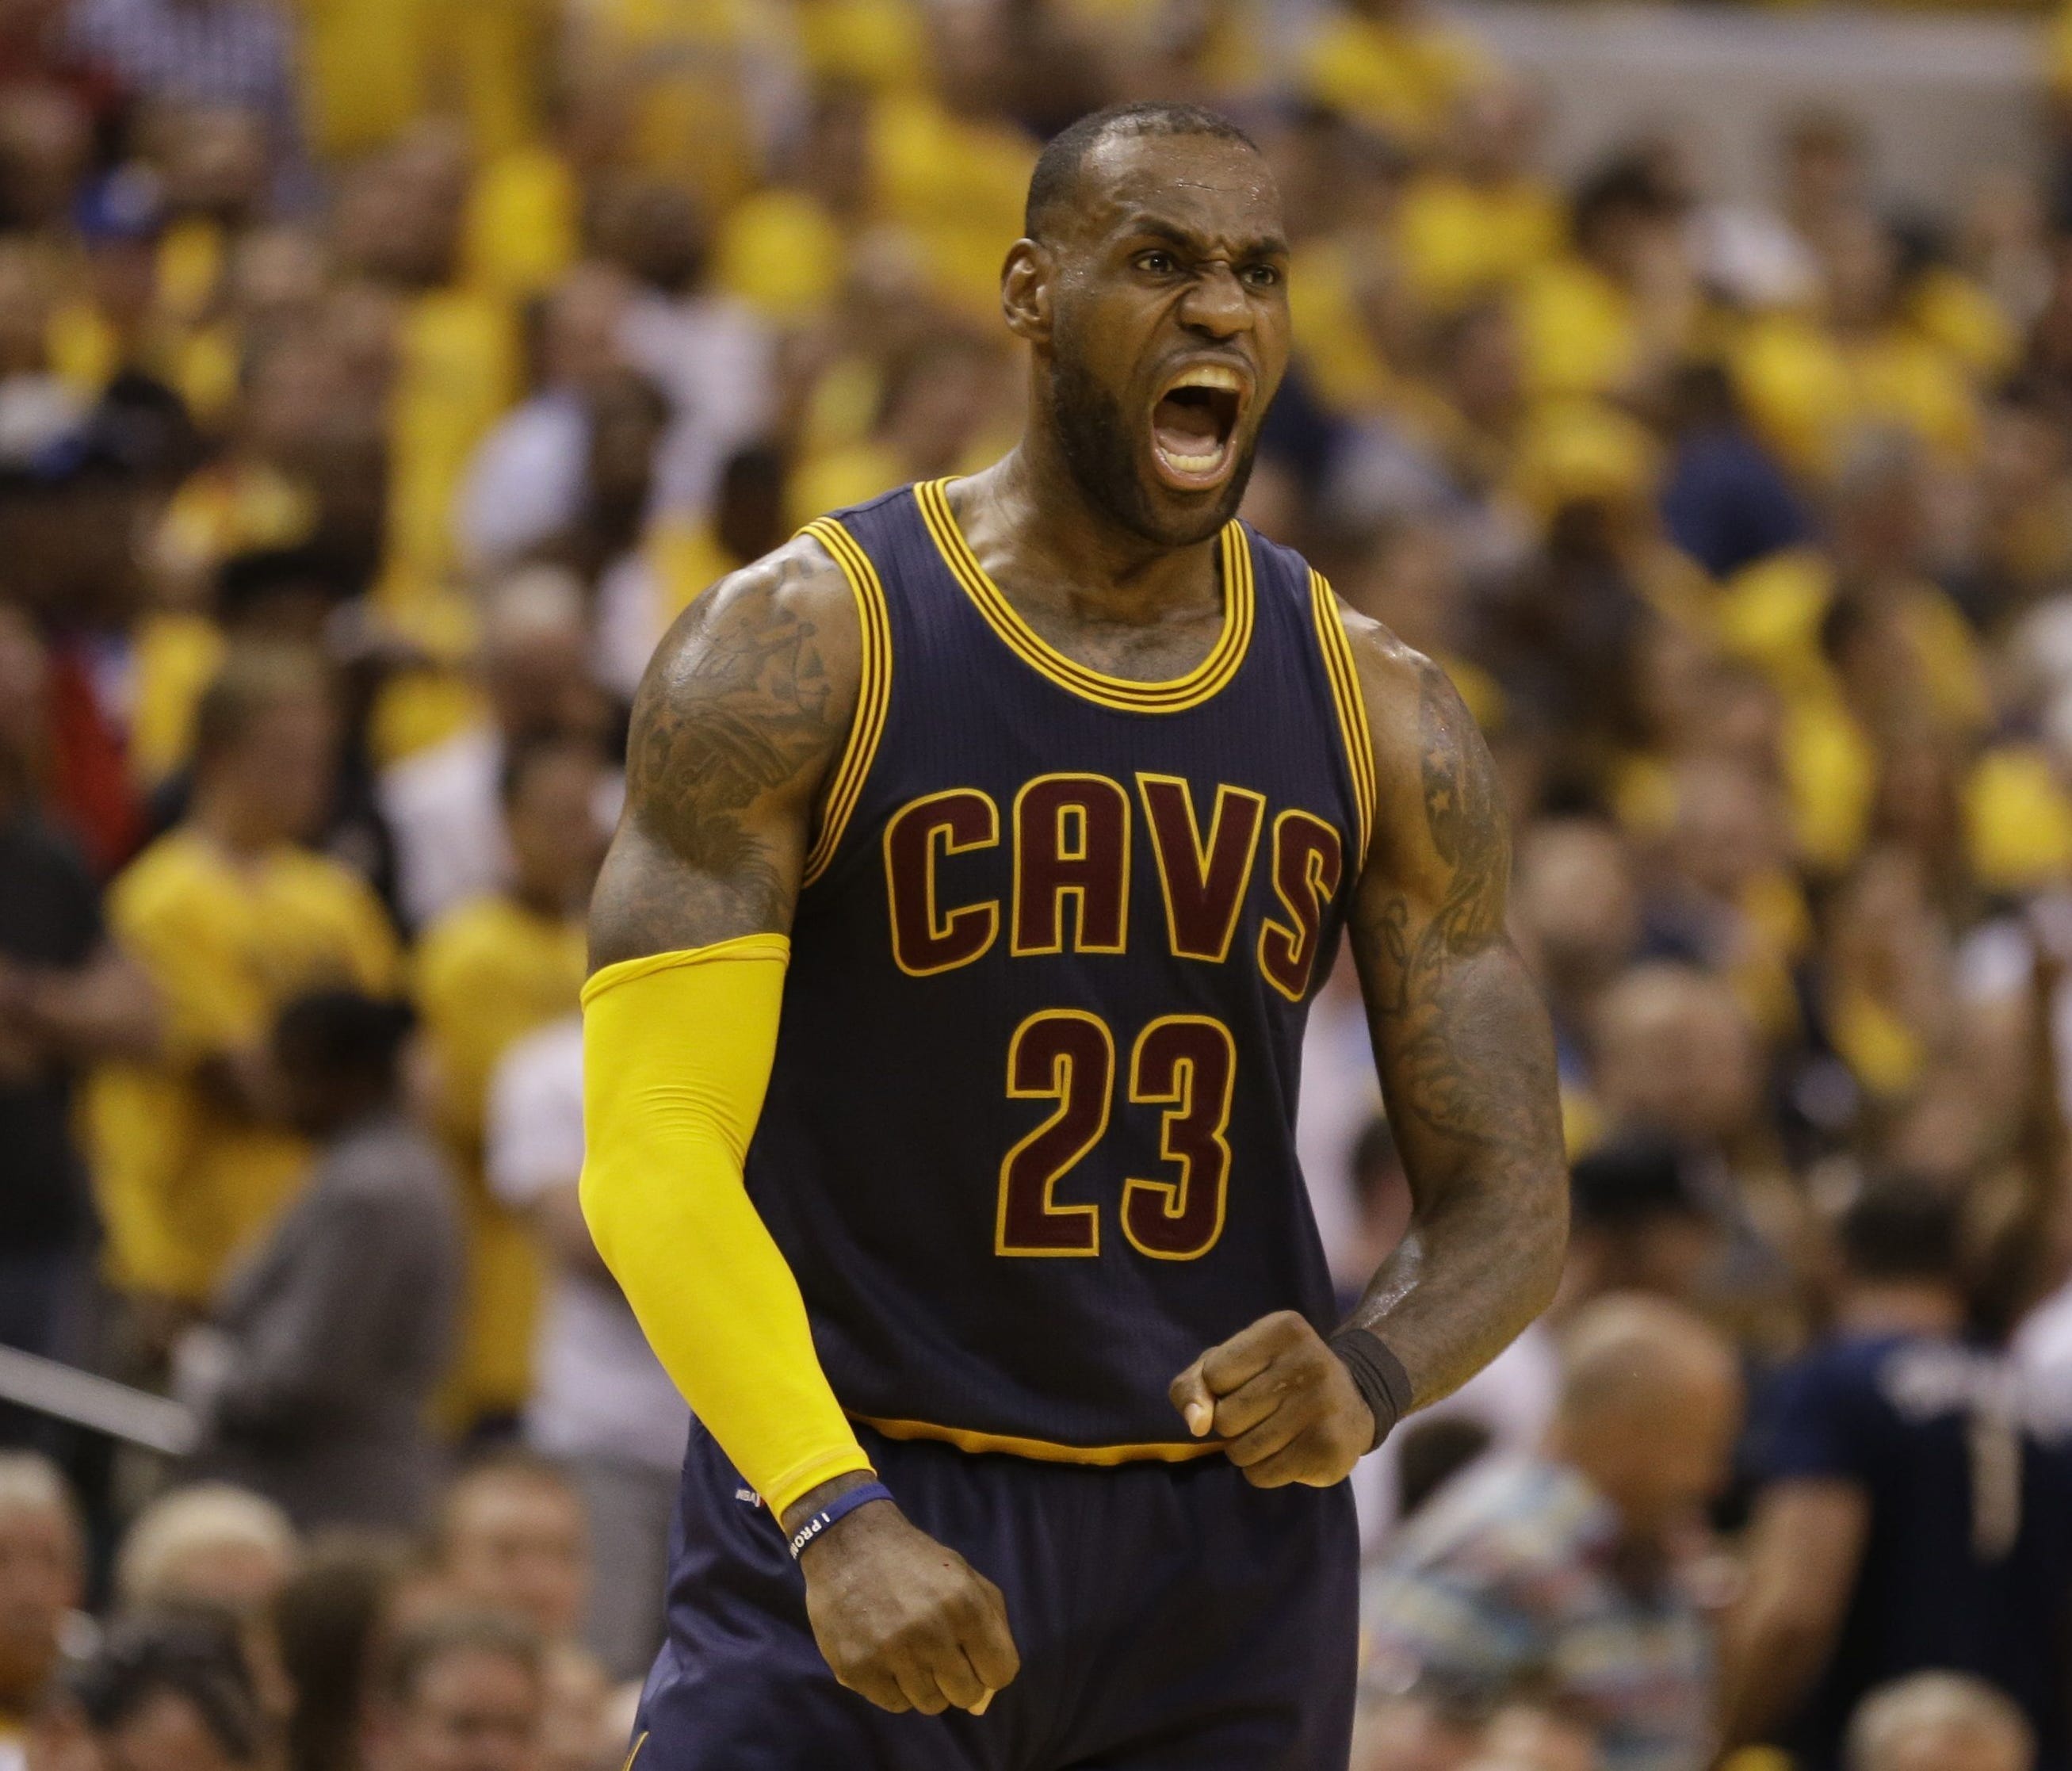 LeBron James' 17th career playoff triple-double led the Cavs' to an historic comeback.